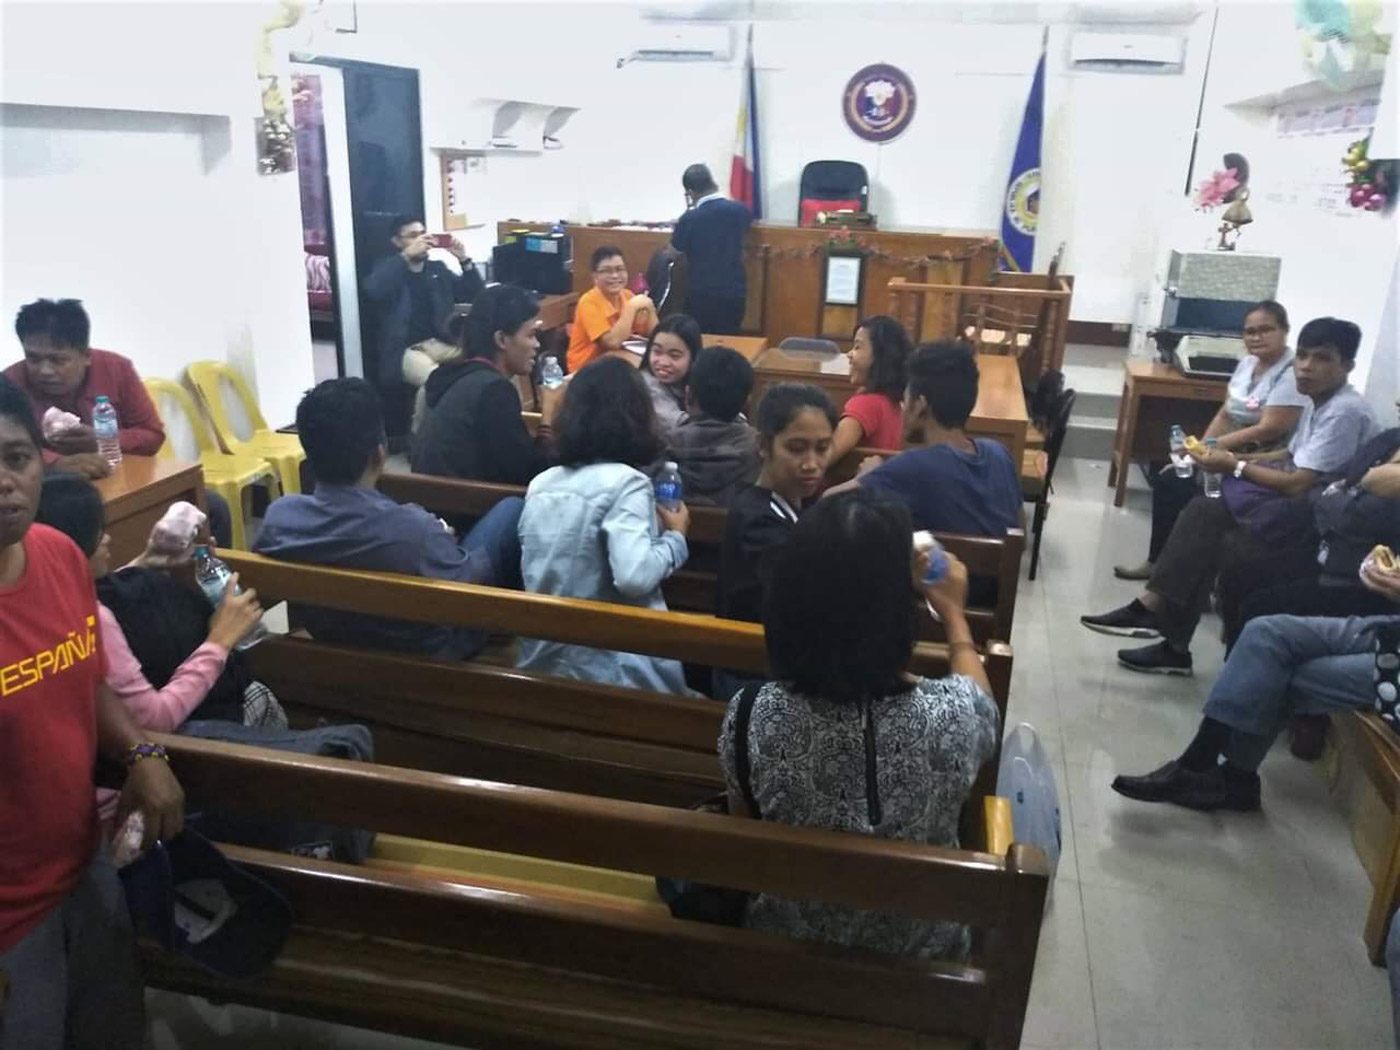 Satur Ocampo, 17 others released from Davao jail